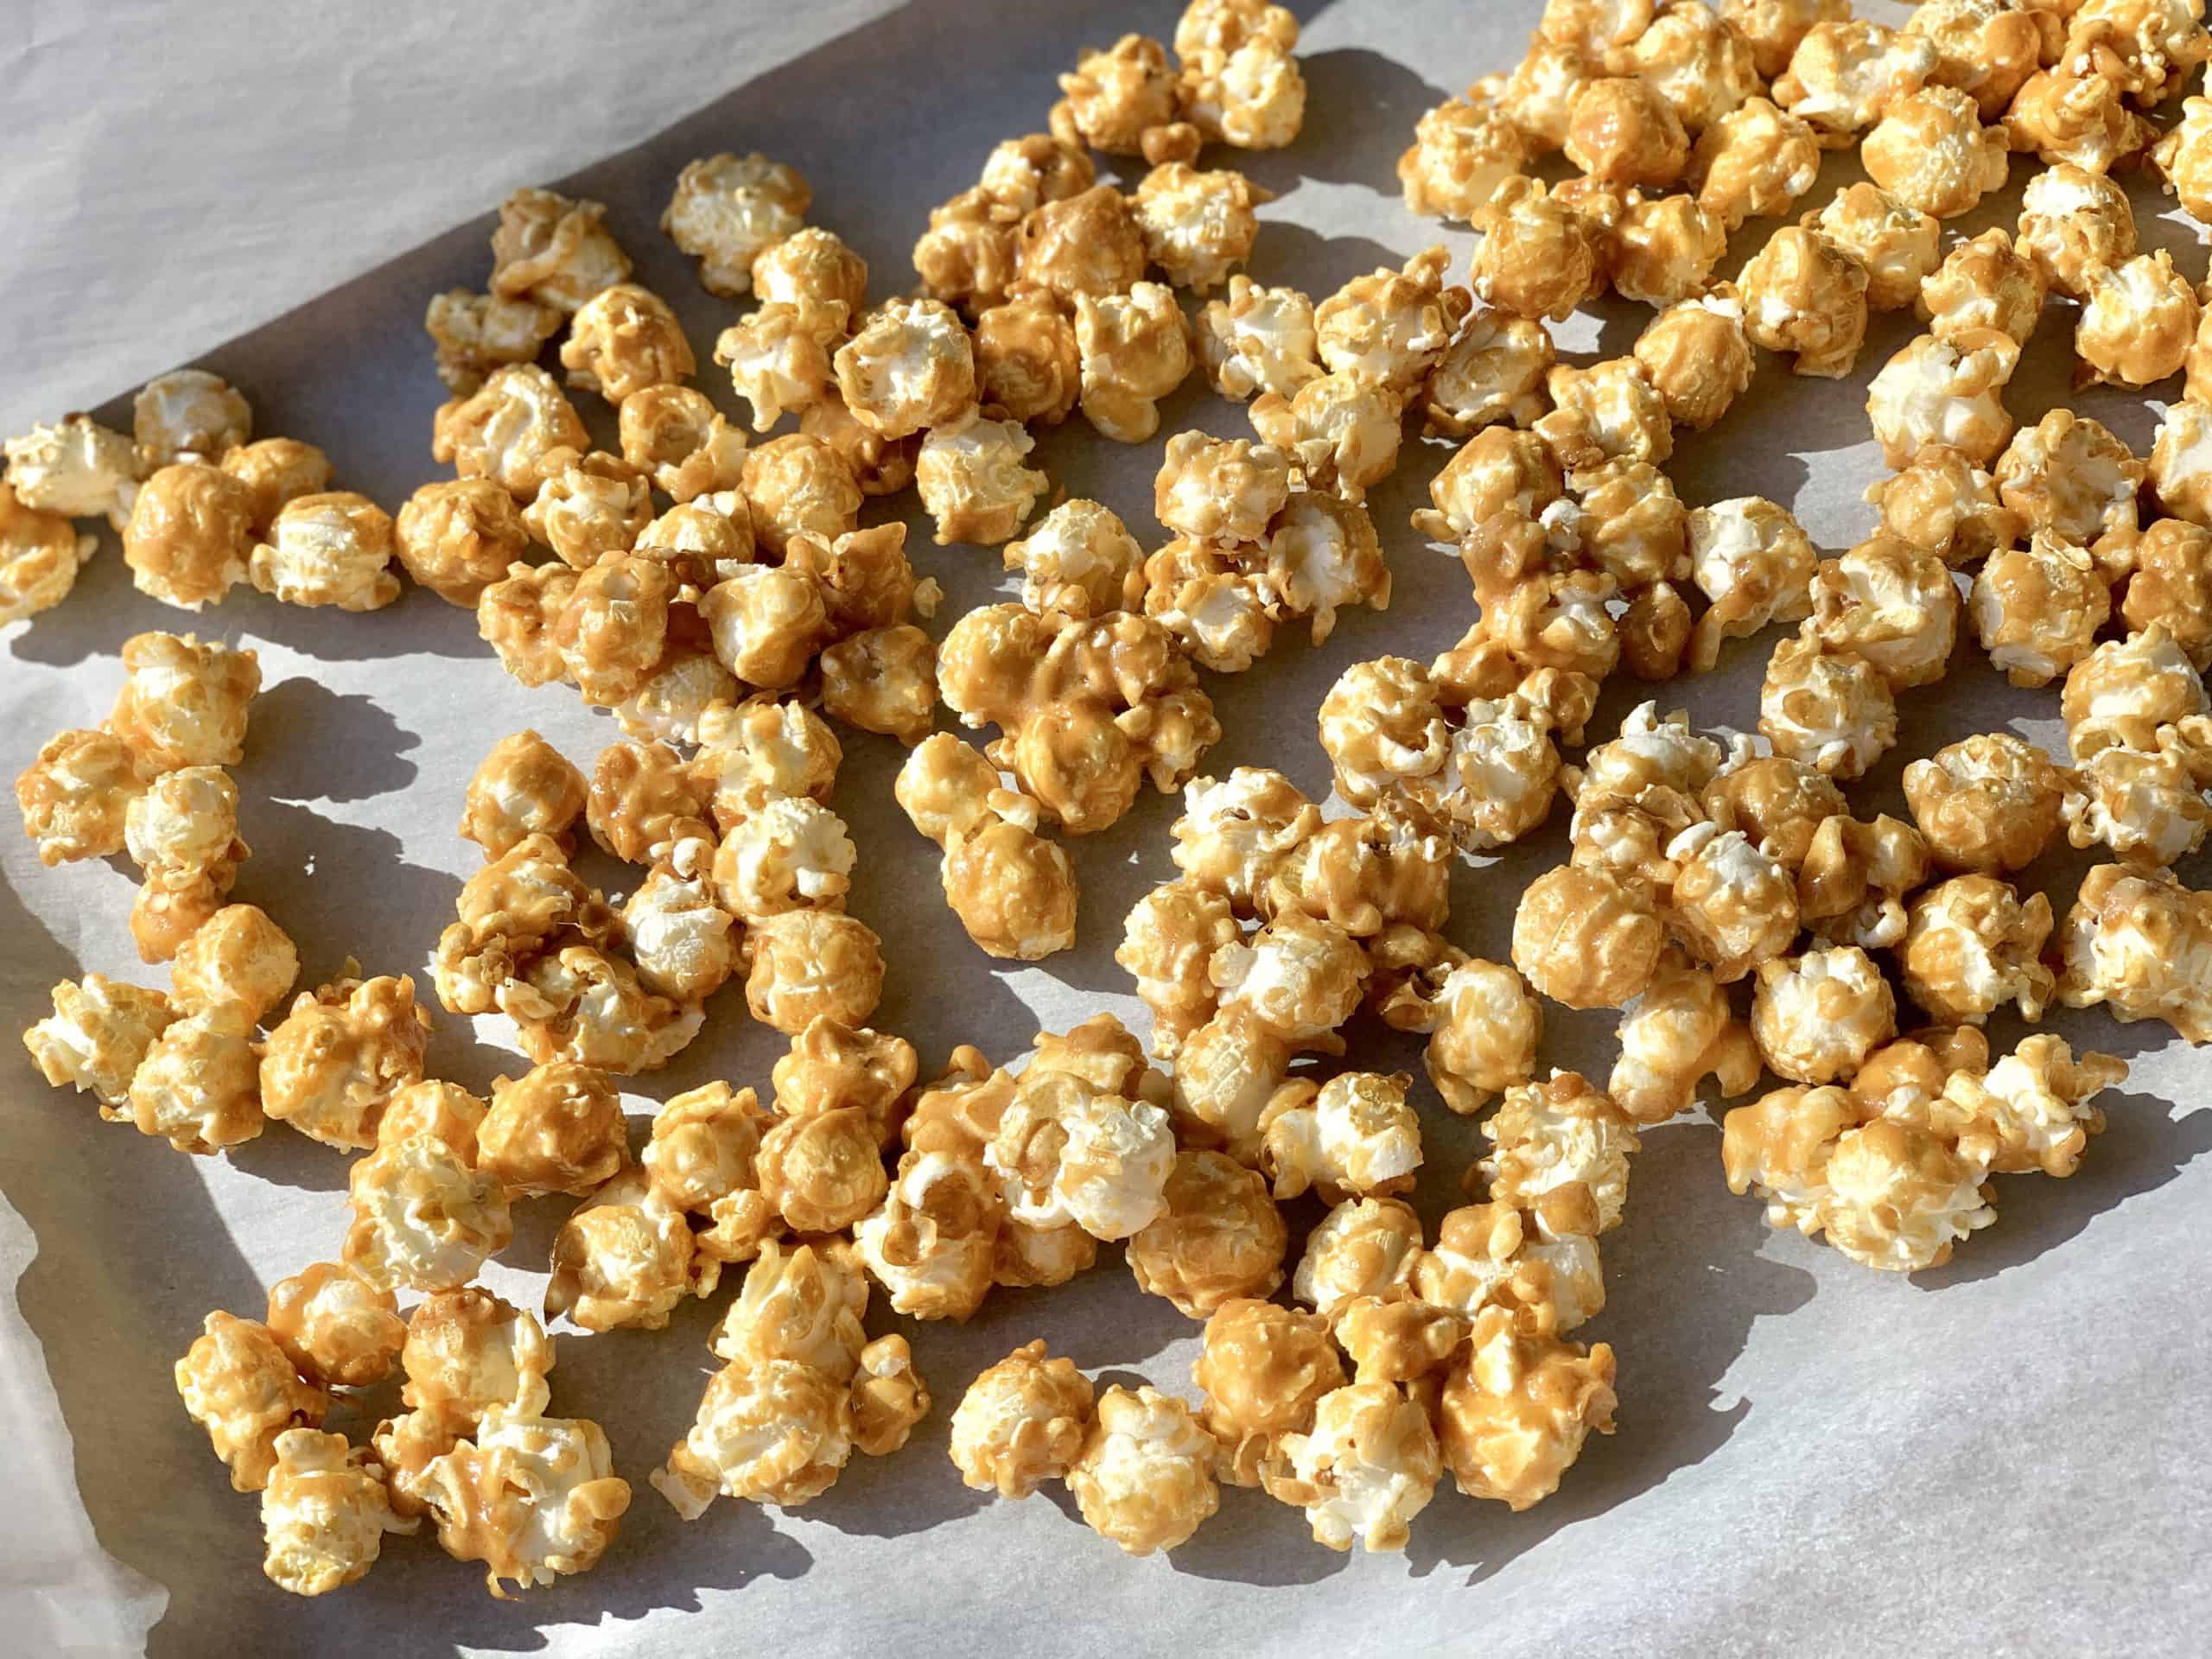 Caramel popcorn fast and easy - La Milanaise made with organic popcorn